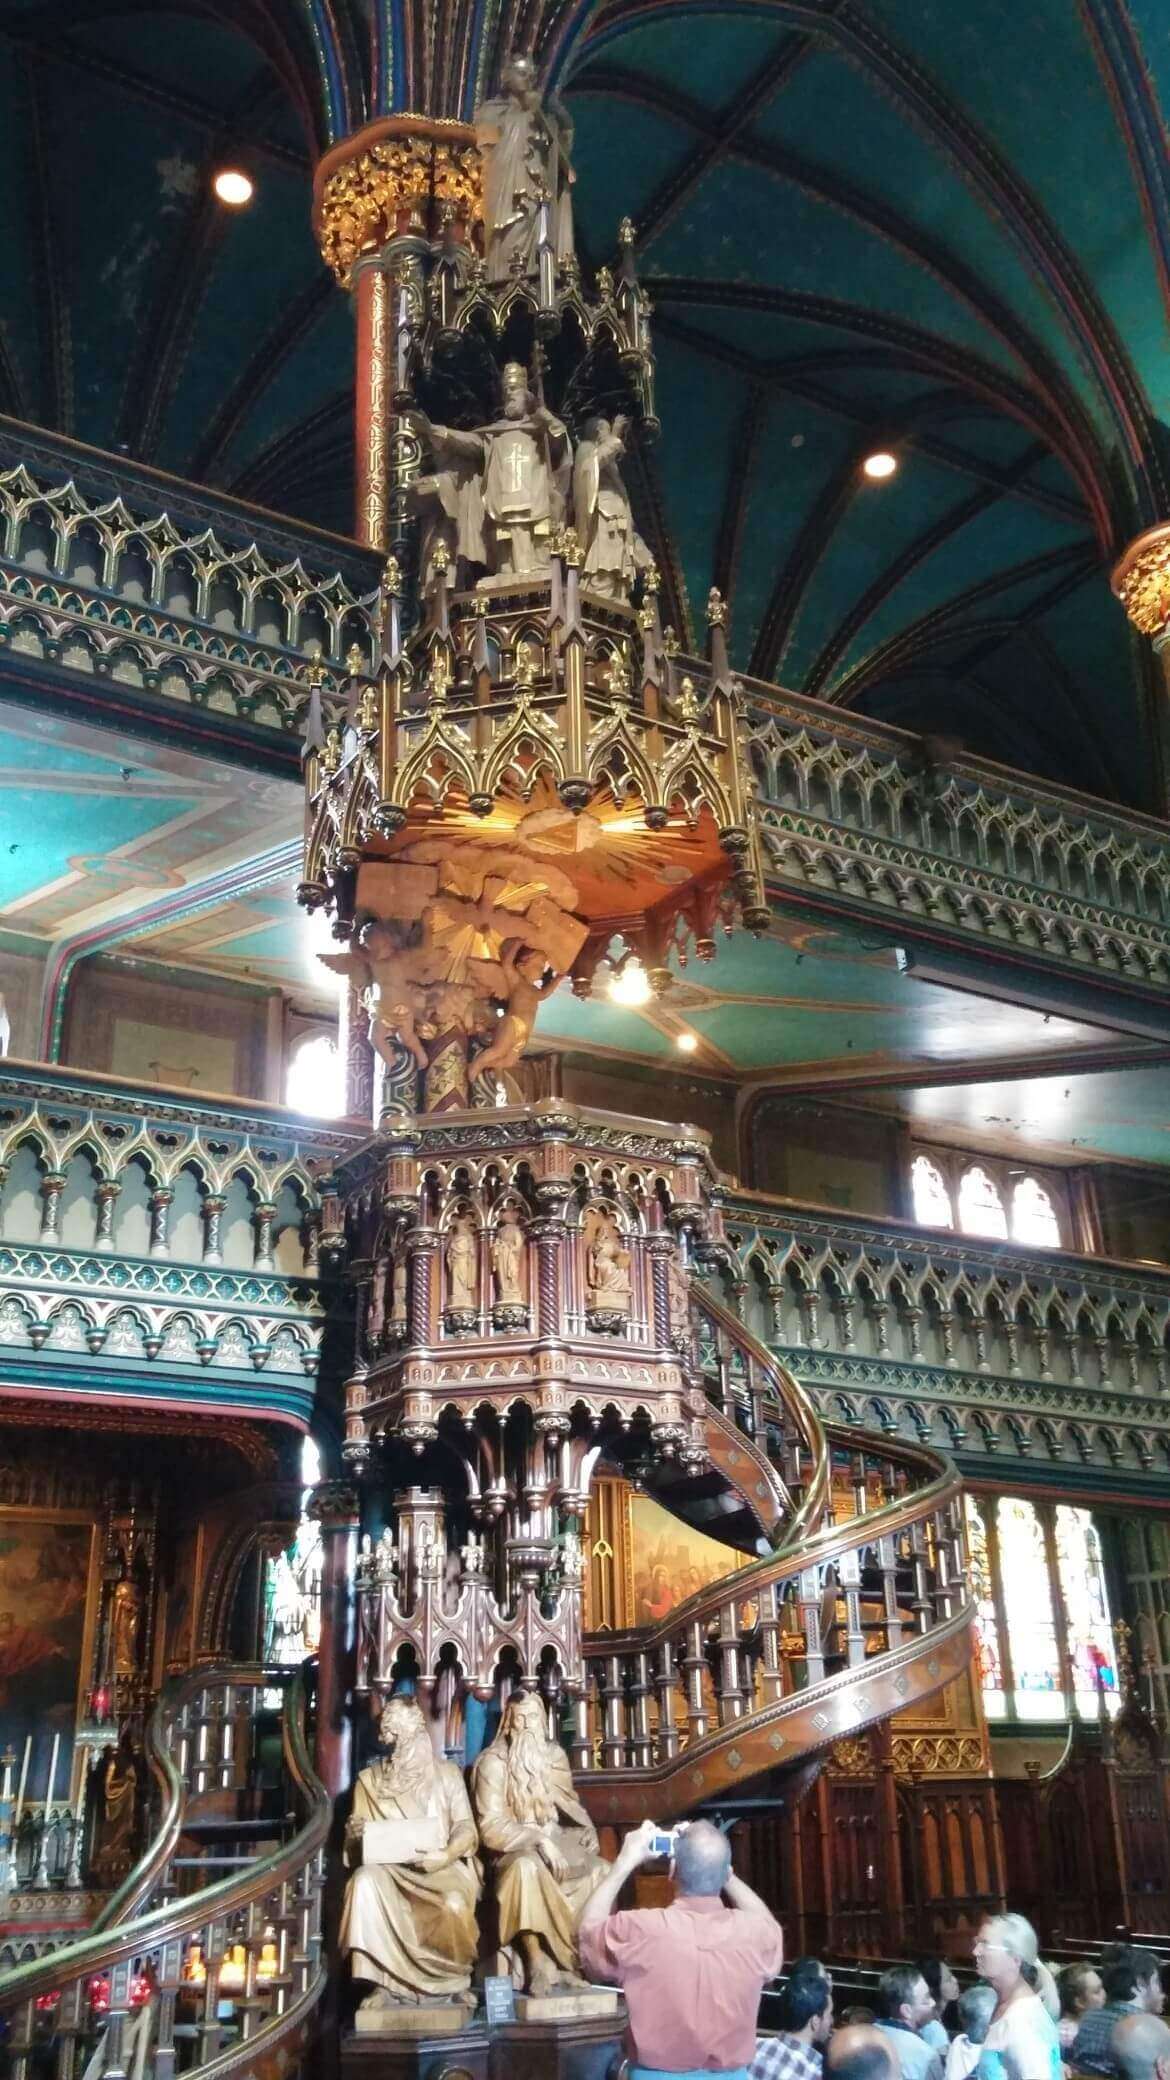 Exquisitely carved pulpit